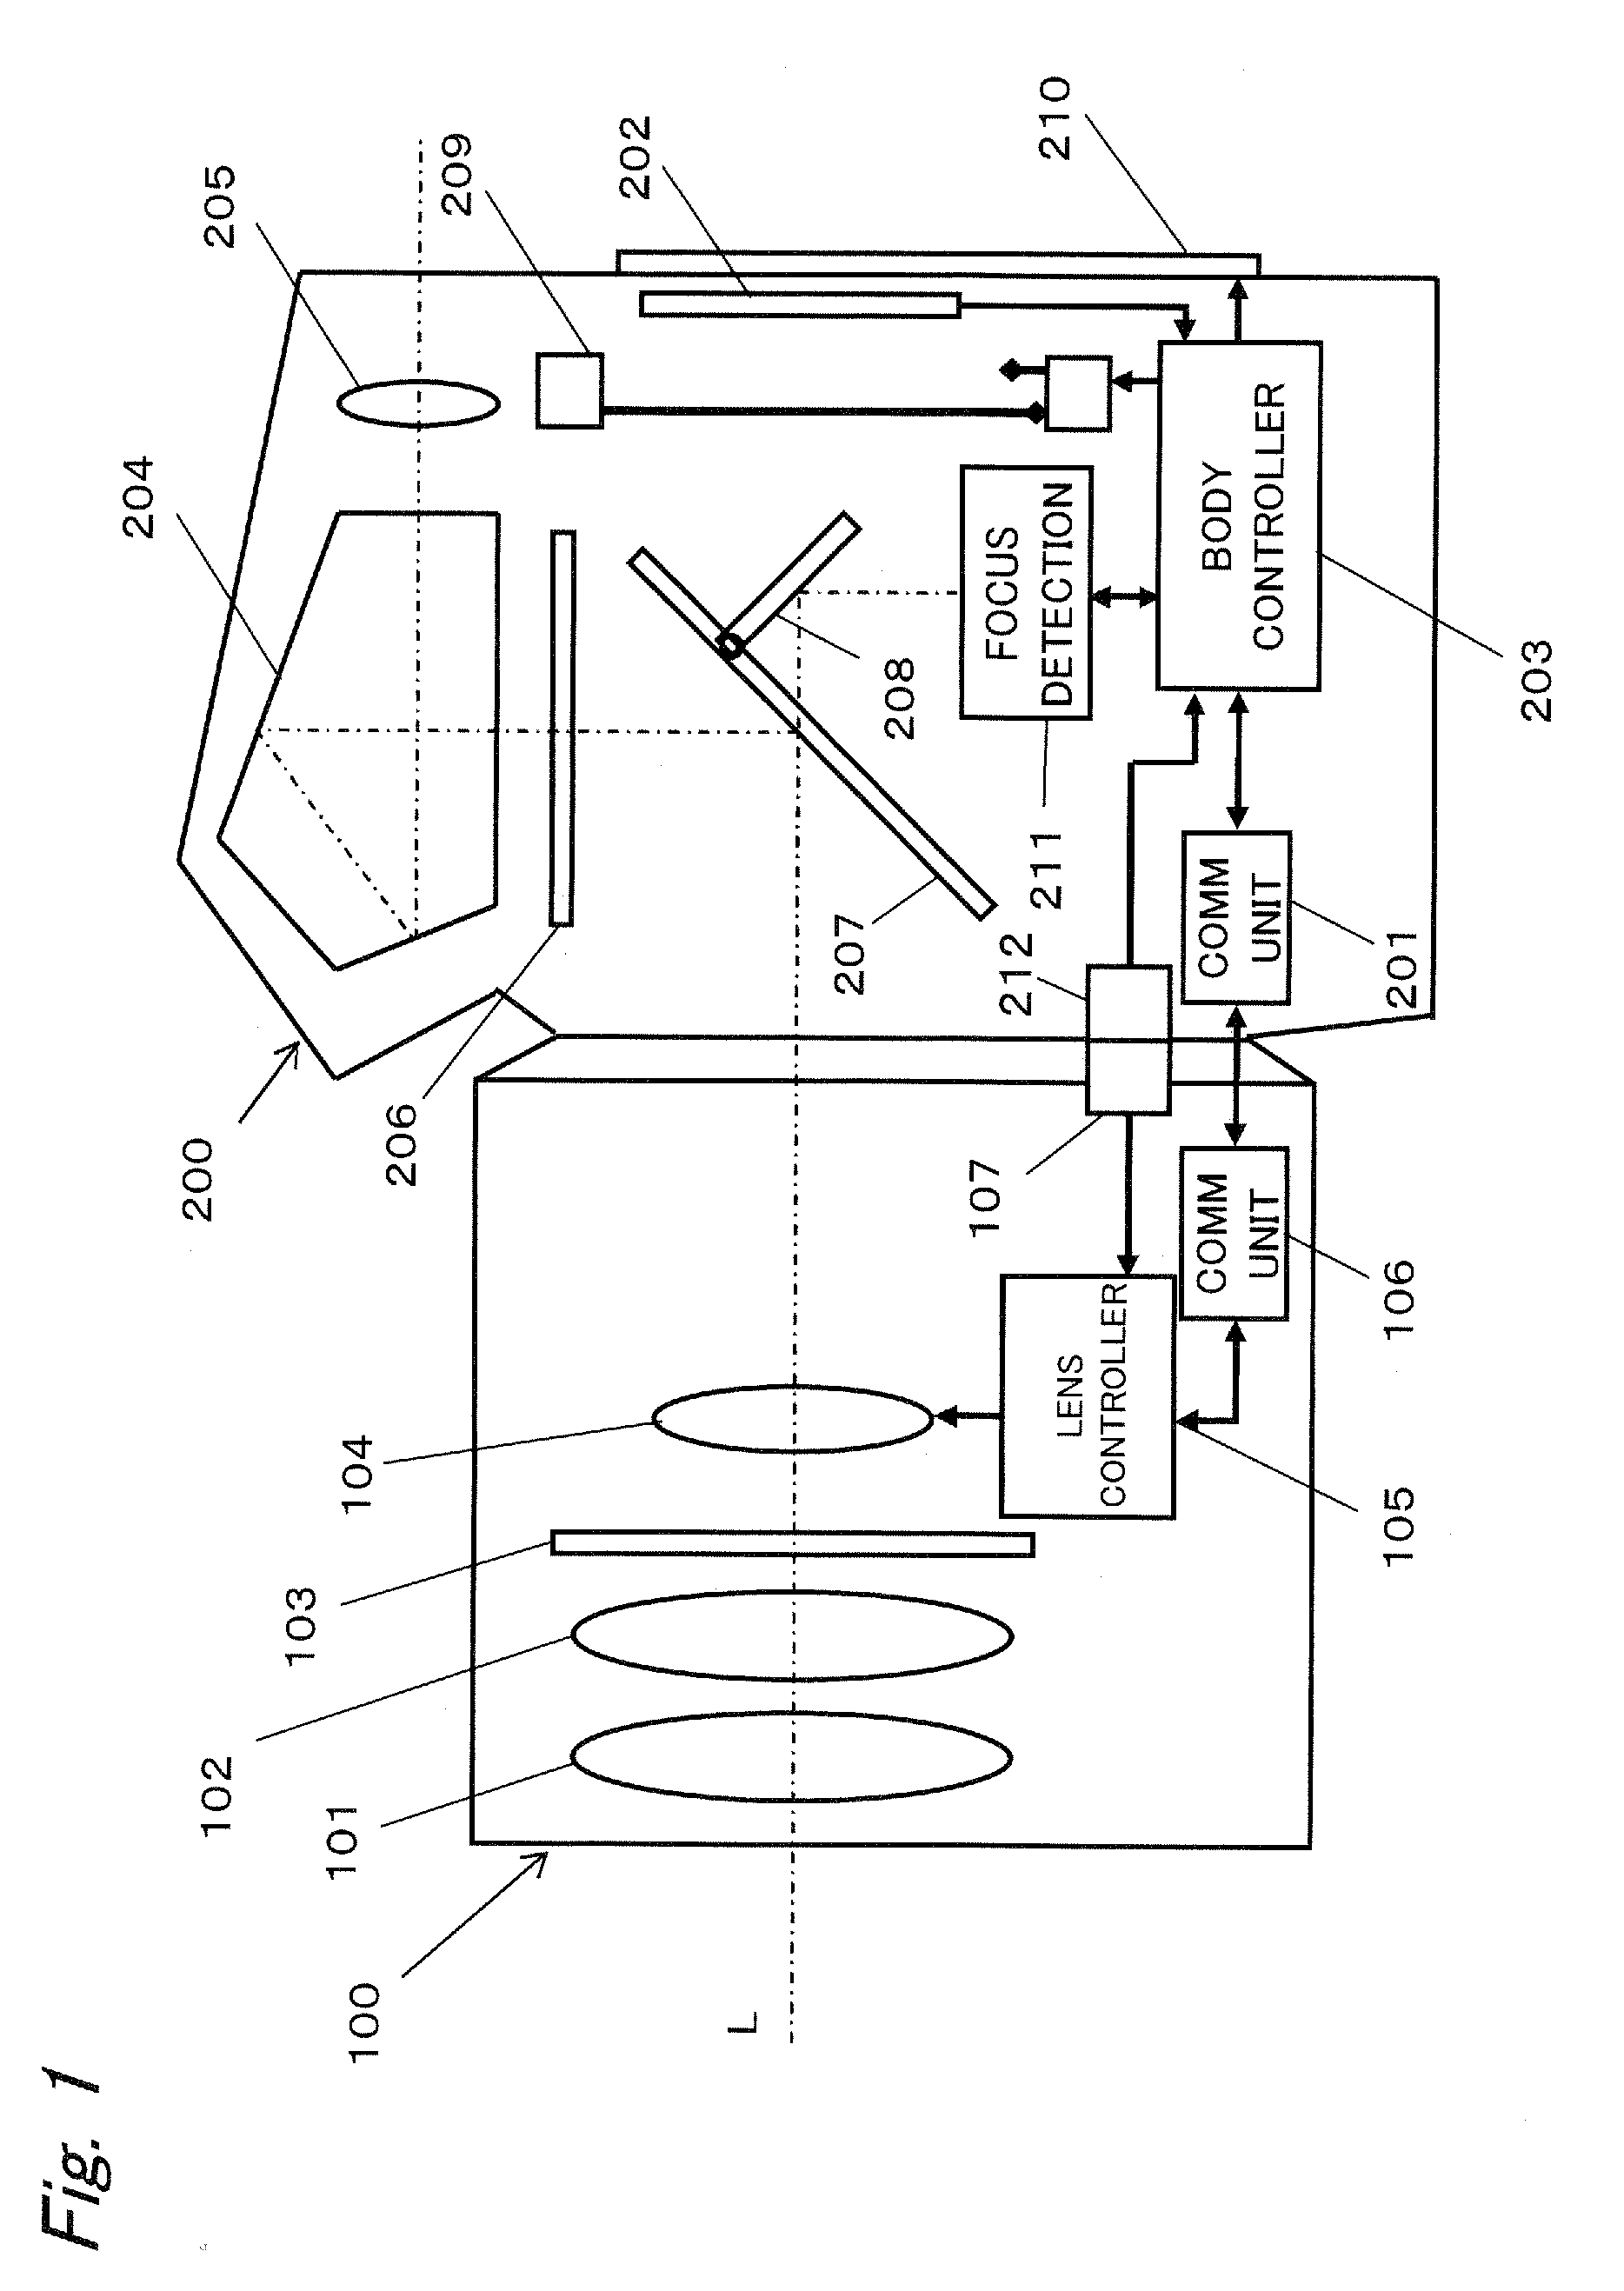 Imaging system, camera body and interchangeable lens